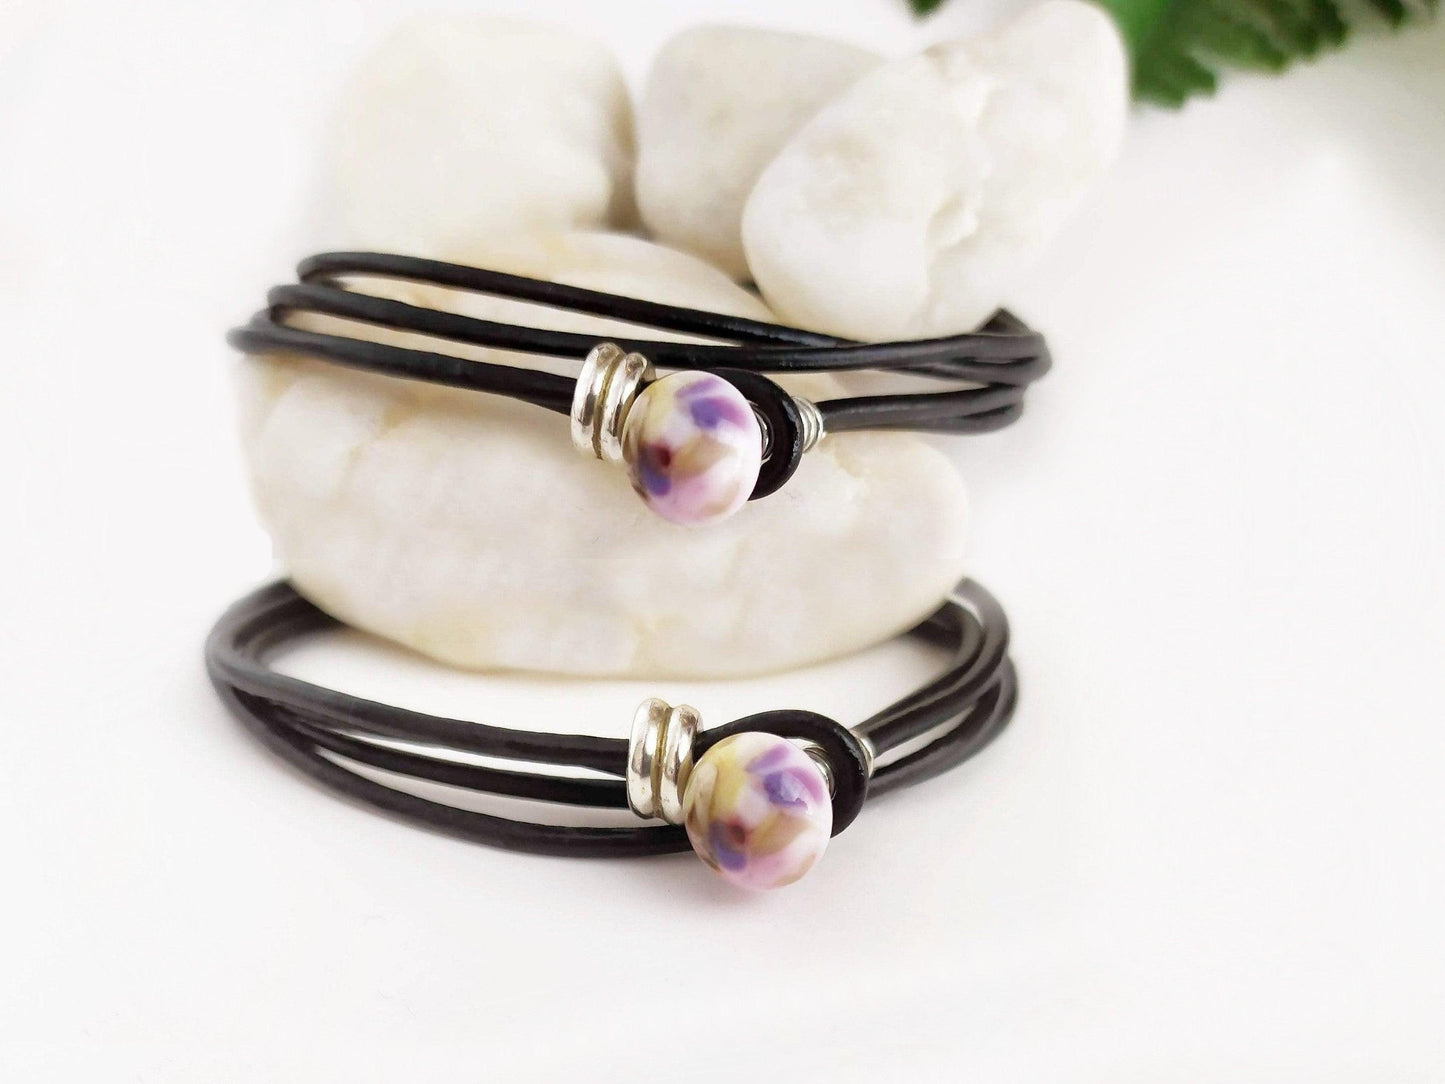 Double leather bracelet with decorated ceramic ball